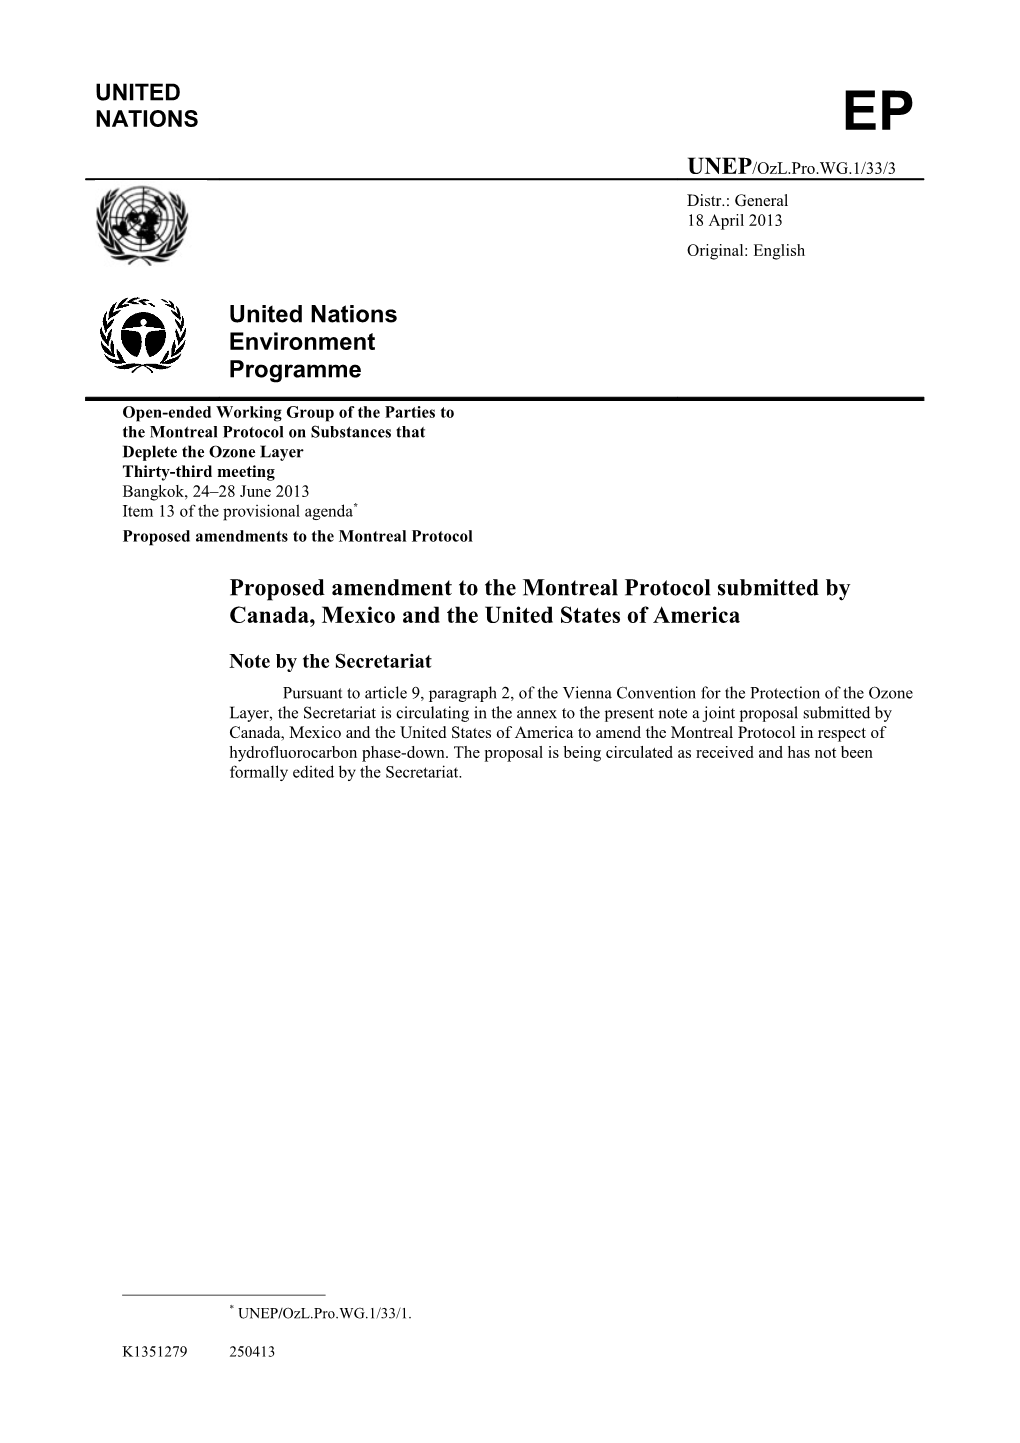 Proposed Amendment to the Montreal Protocol Submitted by Canada, Mexico and the United